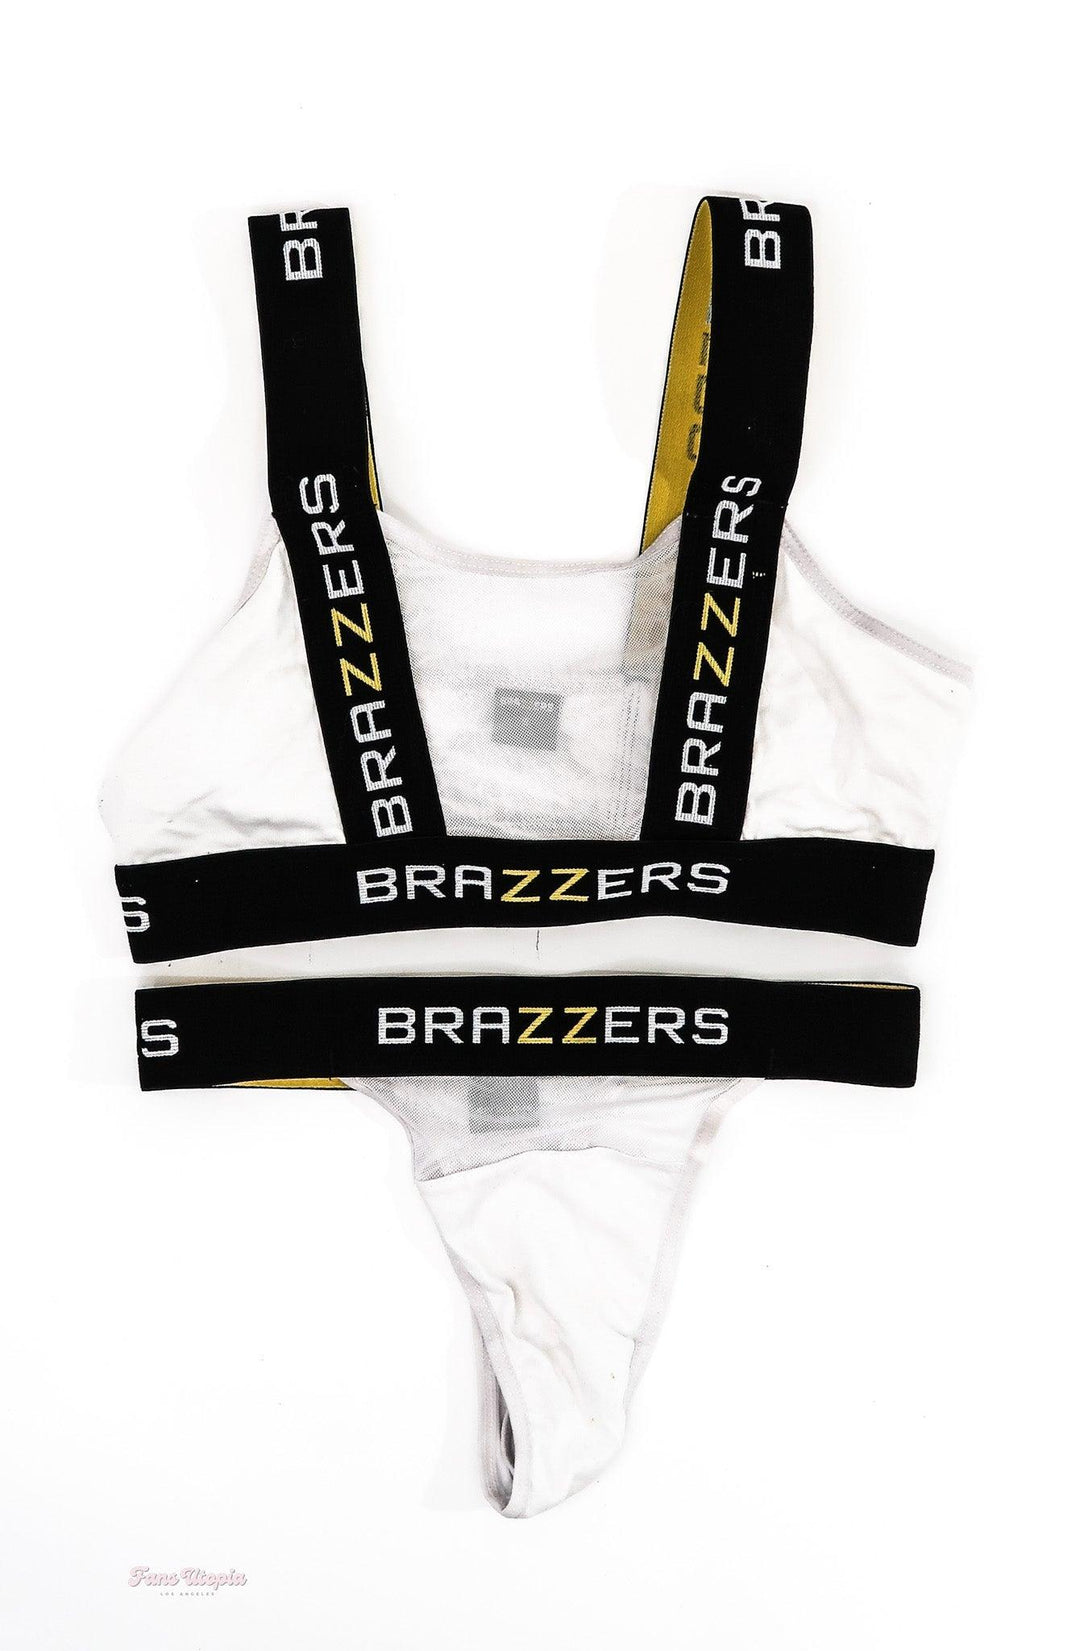 Anna Claire Clouds Brazzers Bra & Panty Set - FANS UTOPIA